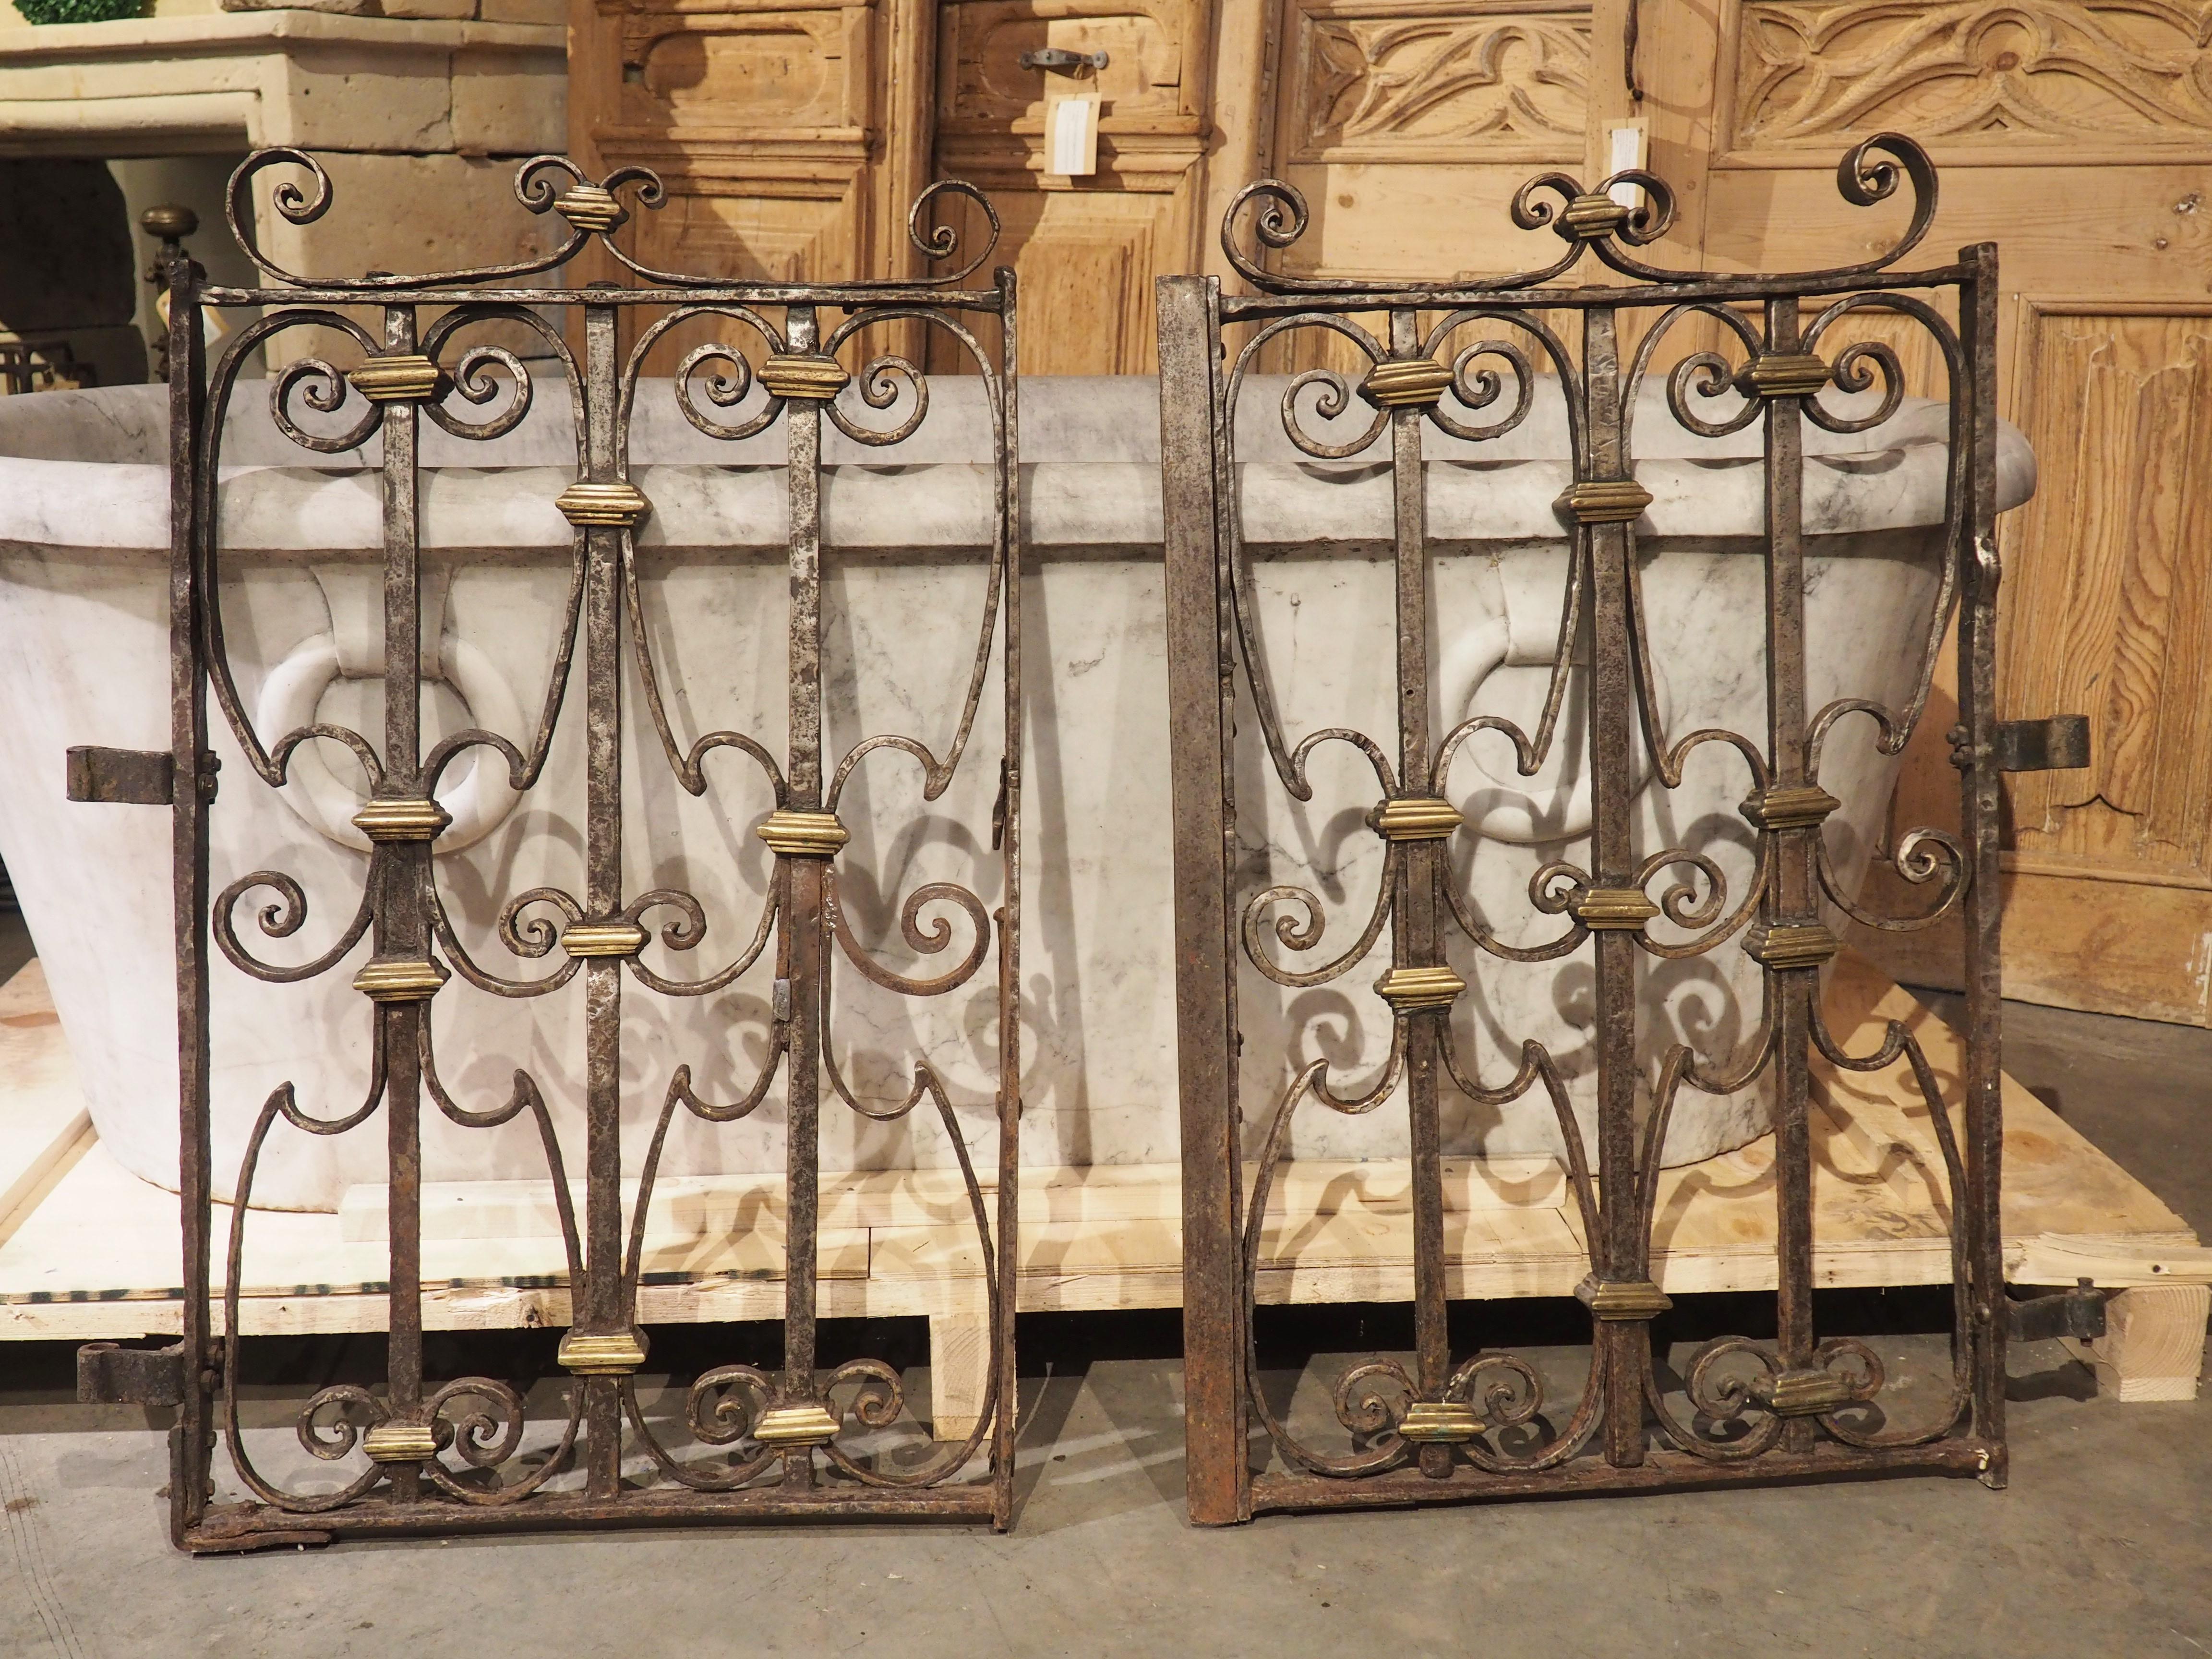 Dating back to the period of Louis XIV (mid- to late-1600’s), these scrolled forged iron gates with bronze dore embellishments were crafted in the French section of Basque Country. Le Pays Basque, as it is known in France, is a collection of regions